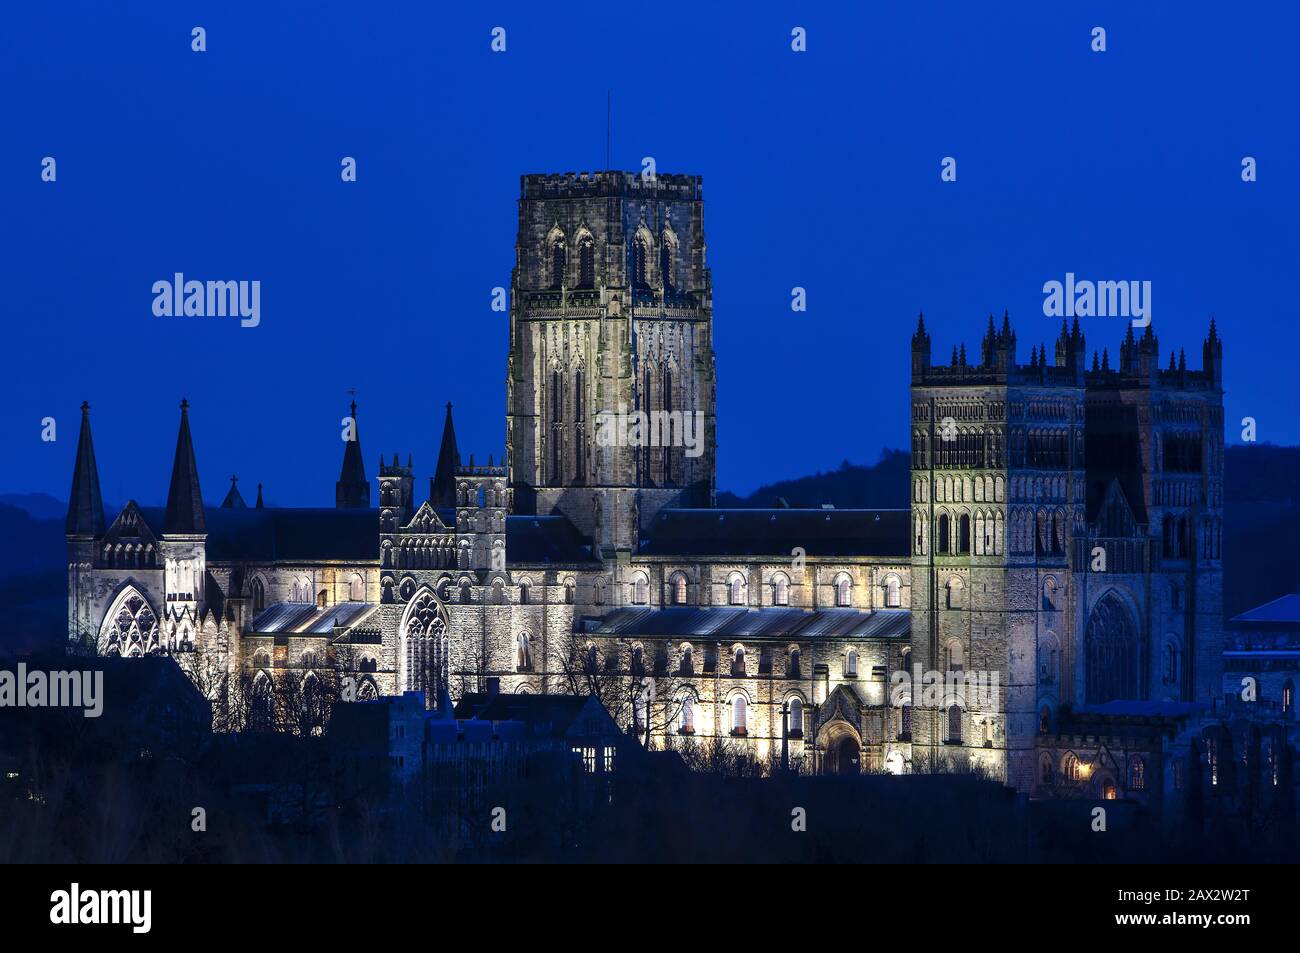 External view of Durham Cathedral floodlit at dusk, City of Durham, County Durham, England, United Kingdom Stock Photo